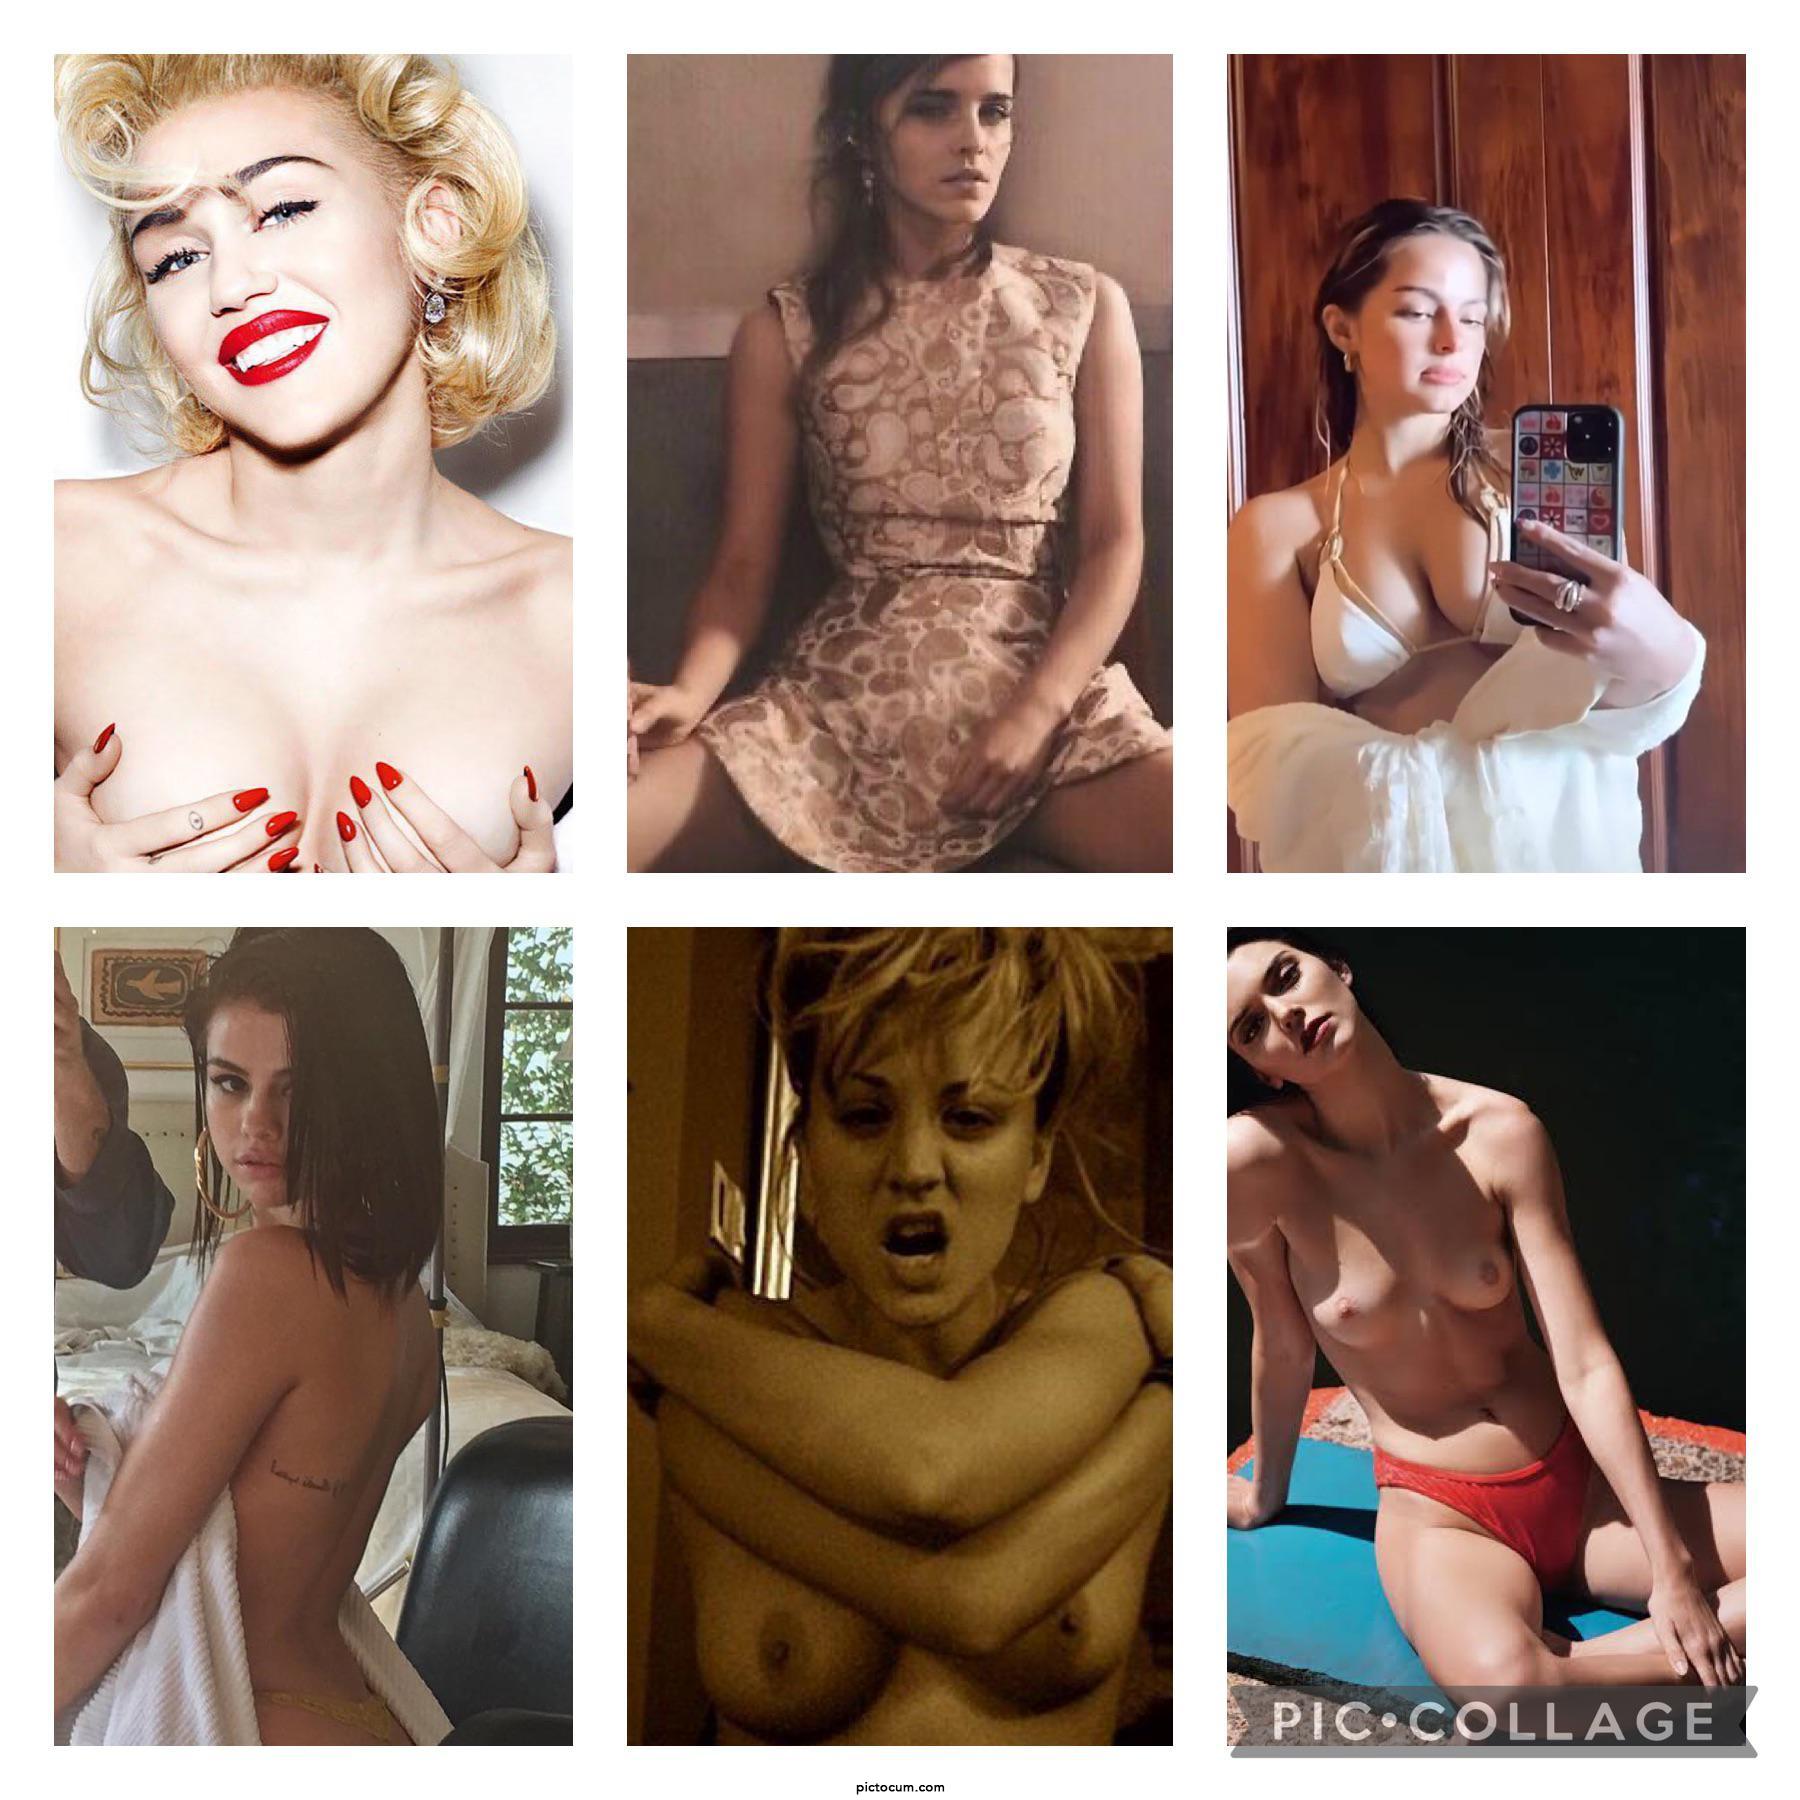 I personally can’t decide between them all. Kendall, Addison, Kaley, Emma, Selena or Miley. Who are you choosing and why? Bonus round - which two would you take together?